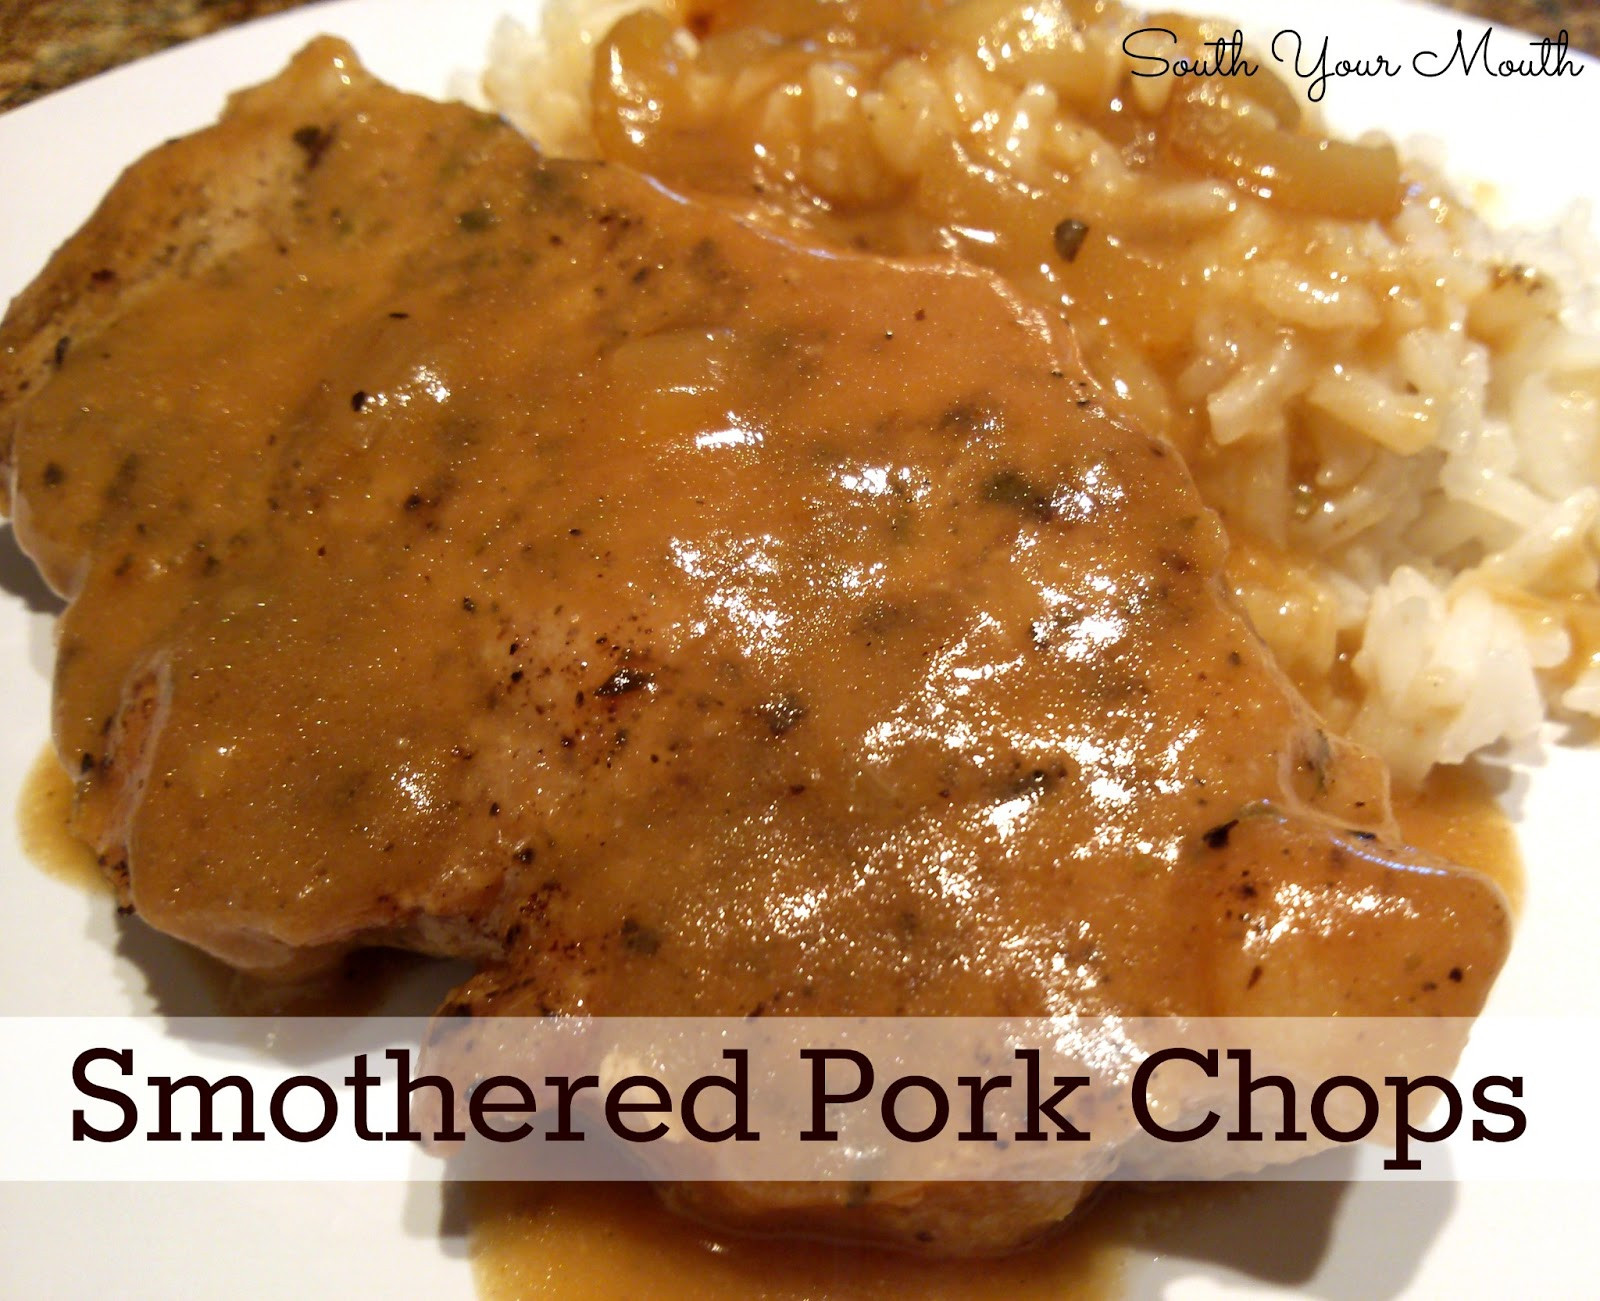 Smothered Pork Chops
 South Your Mouth Smothered Pork Chops